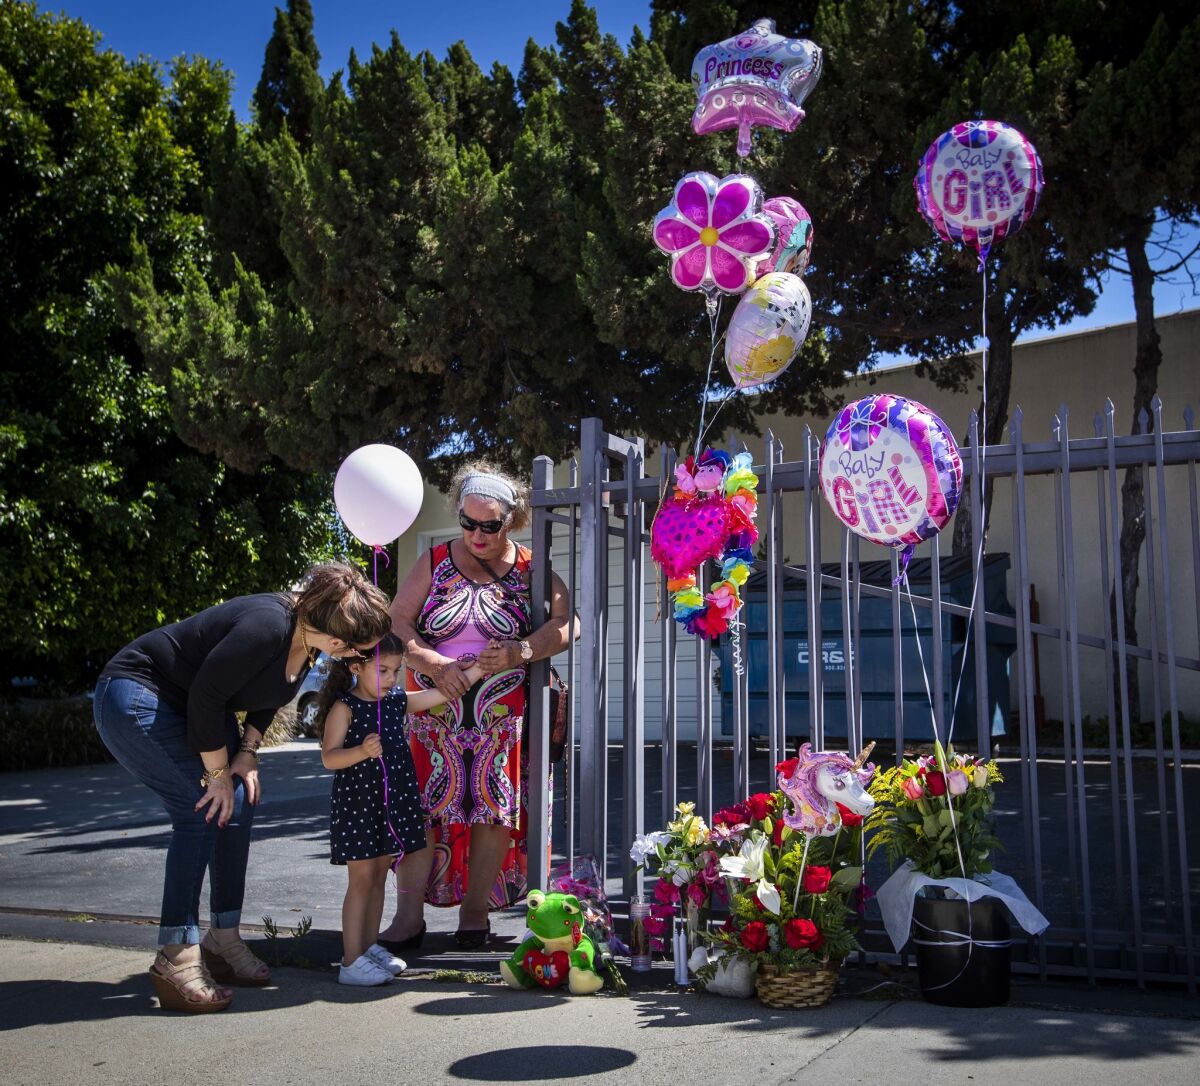 Veronica Fregoso, left, her daughter Bella, 3, and her mother, Esther Fregoso pause in front of a small memorial after placing flowers and a rosary at the site where 8-month-old Alexia Rose Echeverria was found dead.